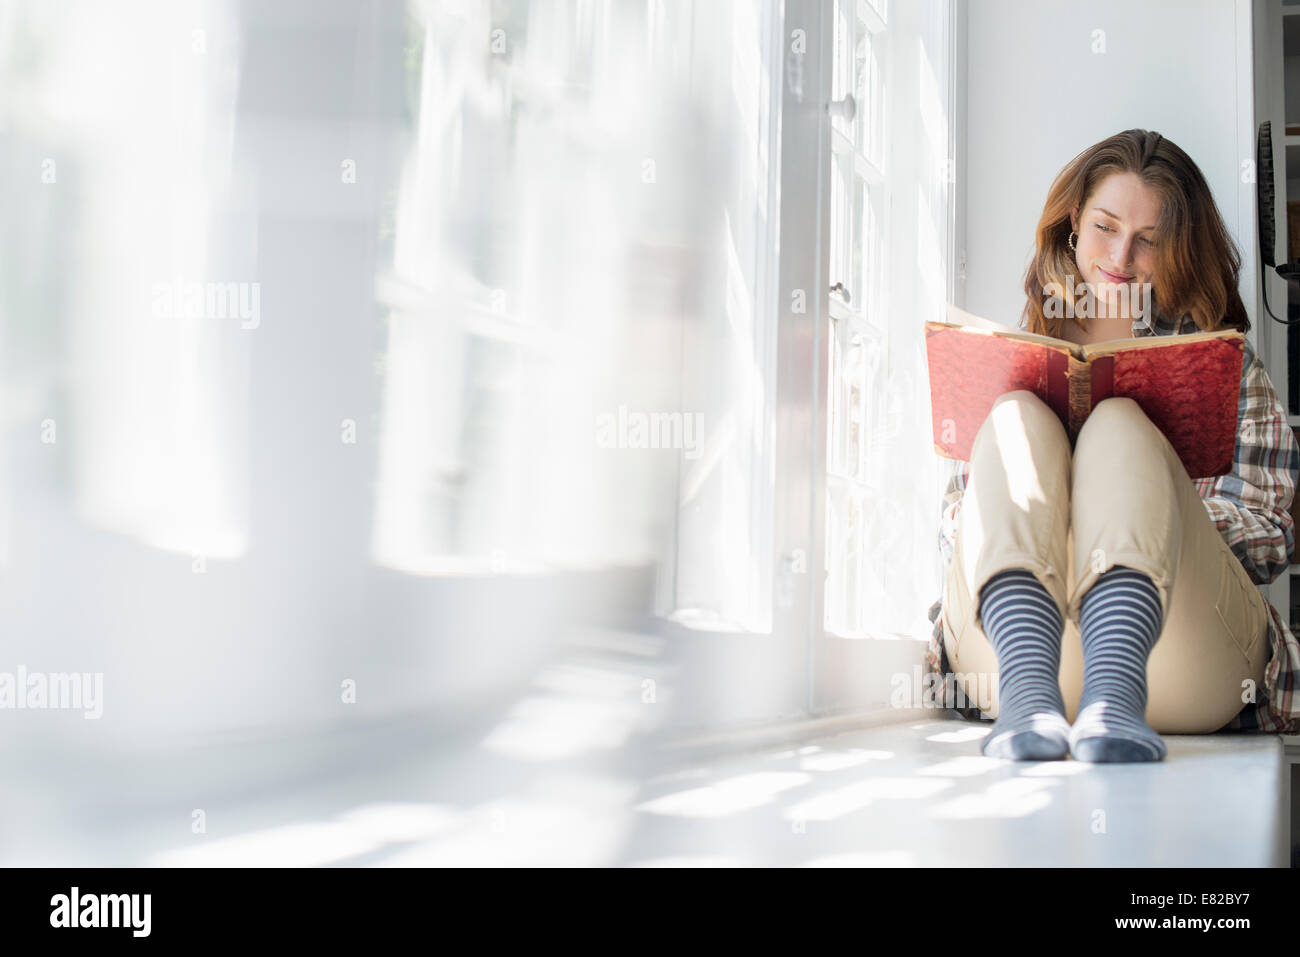 A woman seated by a window, reading with a book on her lap. Stock Photo